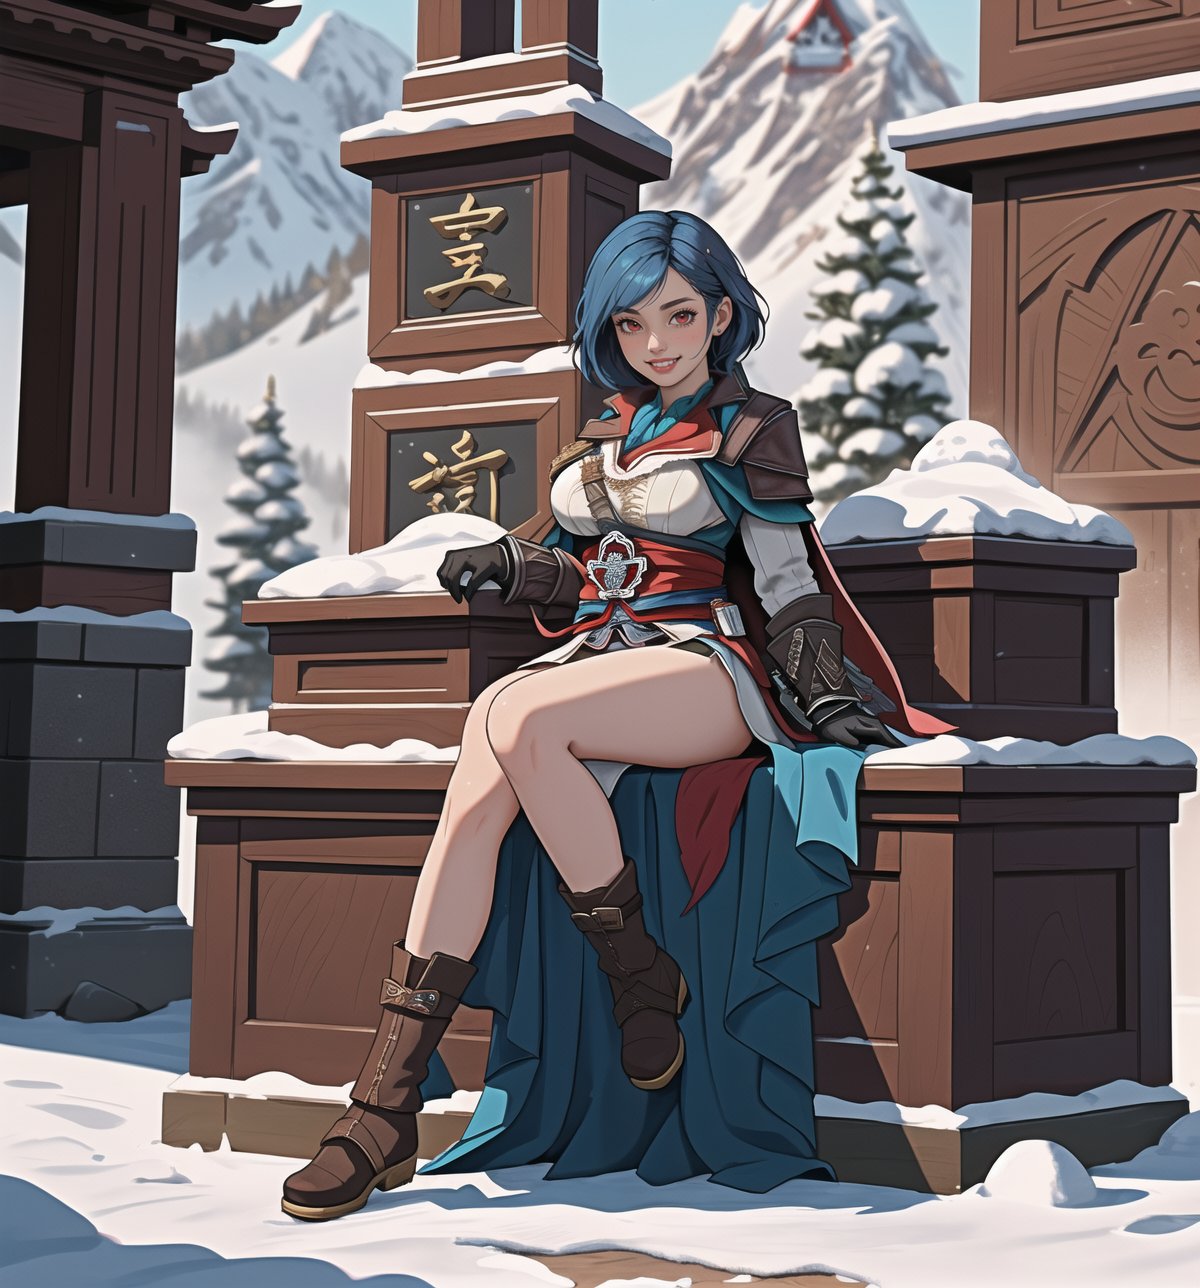 An ultra-detailed 16K masterpiece in the styles of ((Assassin's Creed)), fantasy and adventure, rendered in ultra-high resolution with realistic detail. Fammy, a beautiful 23-year-old woman, is dressed as an assassin in an ancient temple in the snowy mountains. She wears a black cape, a white tunic, a black belt, black boots and black gloves. Her short ((blue hair)) is styled in a Mohican cut with gradient effects. She has red eyes, ((looking at the viewer while smiling, showing her teeth)) and wearing red lipstick. The image emphasises Fammy's imposing figure and the architectural elements of the ancient temple. The rocky, wooden and carved structures, together with the statuettes and the backdrop of snowy mountains, create a mysterious and tense atmosphere. The melted wax candles, stone sarcophagus and bones scattered on the floor add macabre detail to the scene. Soft, sombre lighting effects create a relaxing, mysterious atmosphere, while detailed textures on the structures and costume add realism to the image. | A tense and mysterious scene of a beautiful assassin in an ancient temple in the snowy mountains, fusing elements of Assassin's Creed, fantasy and adventure. (((The image reveals a full-body shot as Fammy assumes a sensual pose, engagingly leaning against a structure within the scene in an exciting manner. She takes on a sensual pose as she interacts, boldly leaning on a structure, leaning back and boldly throwing herself onto the structure, reclining back in an exhilarating way.))). | ((((full-body shot)))), ((perfect pose)), ((perfect limbs, perfect fingers, better hands, perfect hands, hands)), ((perfect legs, perfect feet)), ((huge breasts)), ((perfect design)), ((perfect composition)), ((very detailed scene, very detailed background, perfect layout, correct imperfections)), Enhance, Ultra details++, More Detail, poakl